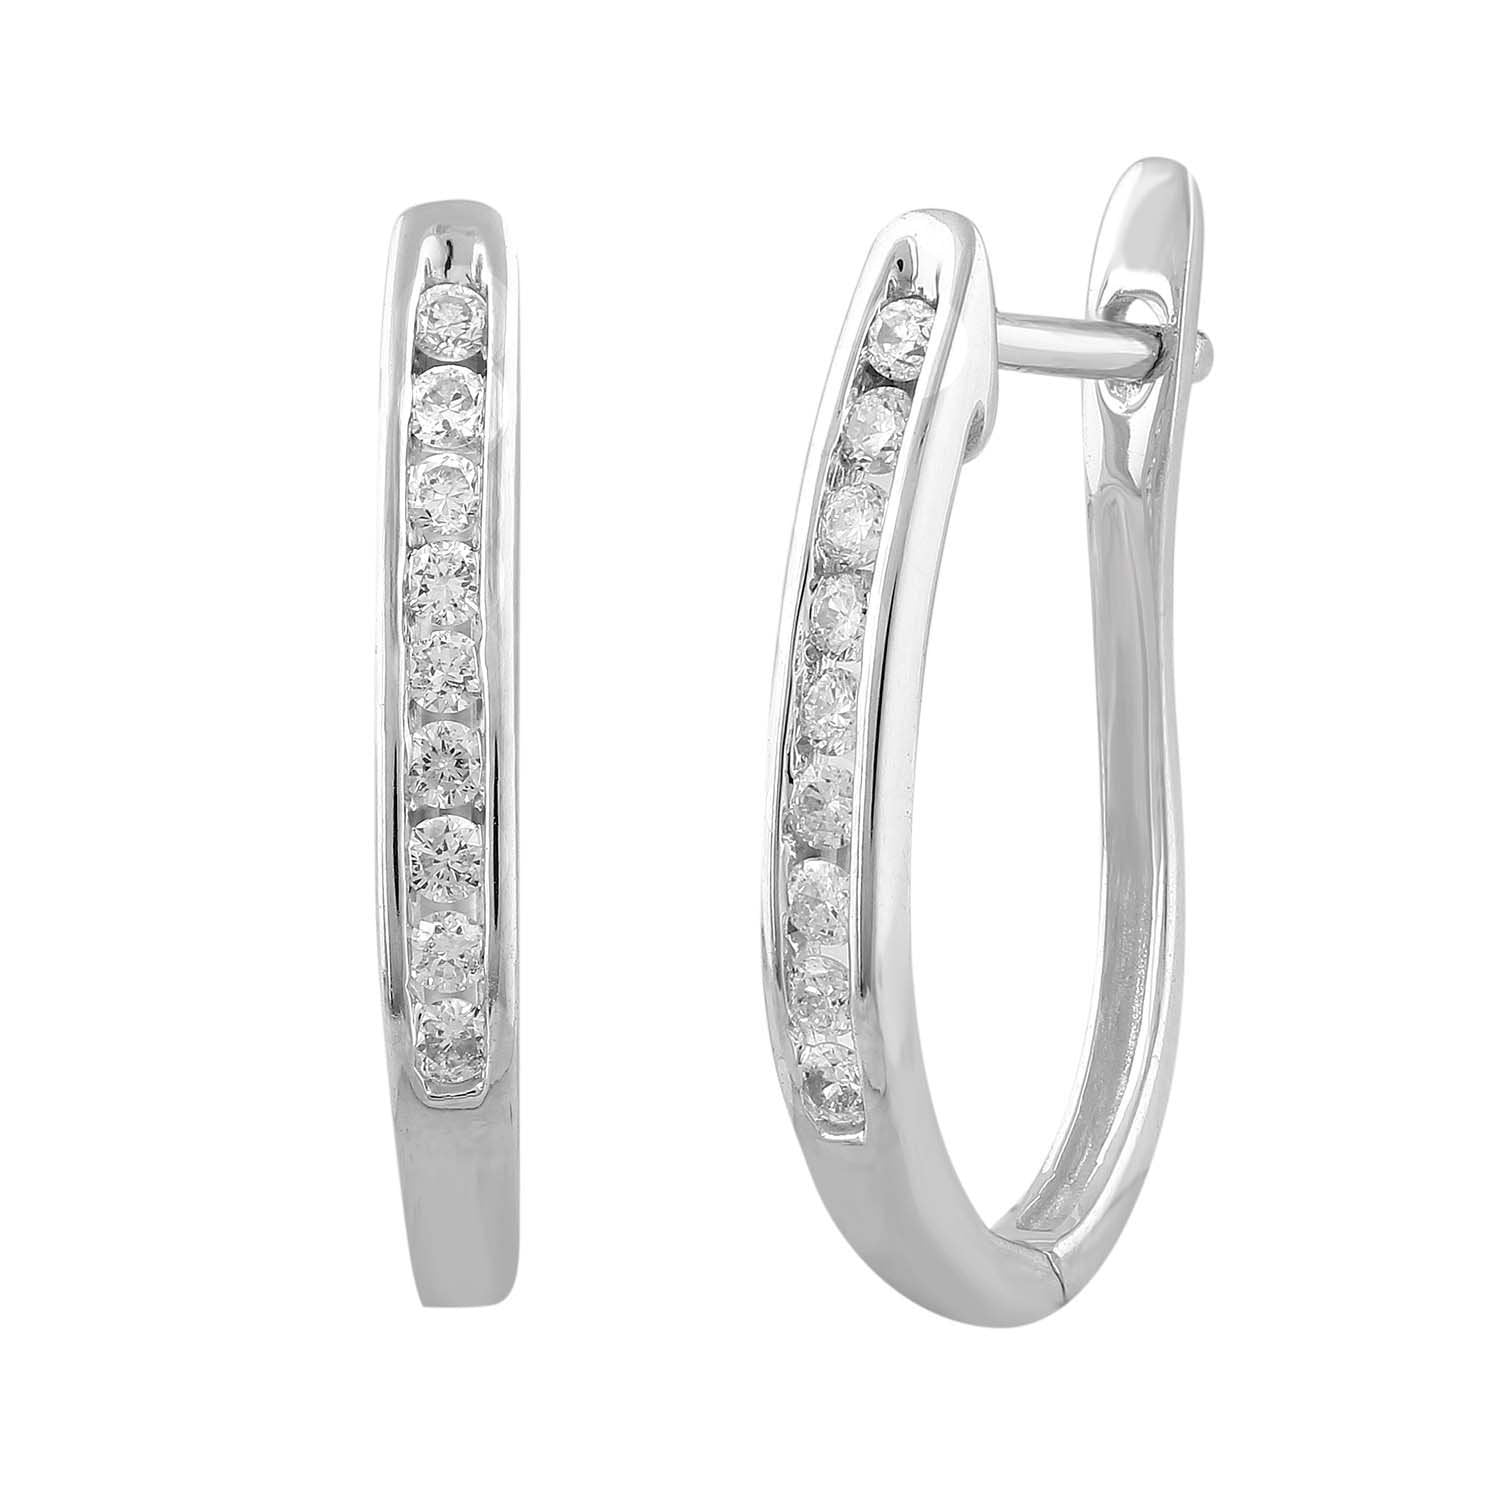 Huggie Earrings with 0.17ct Diamond in 9K White Gold